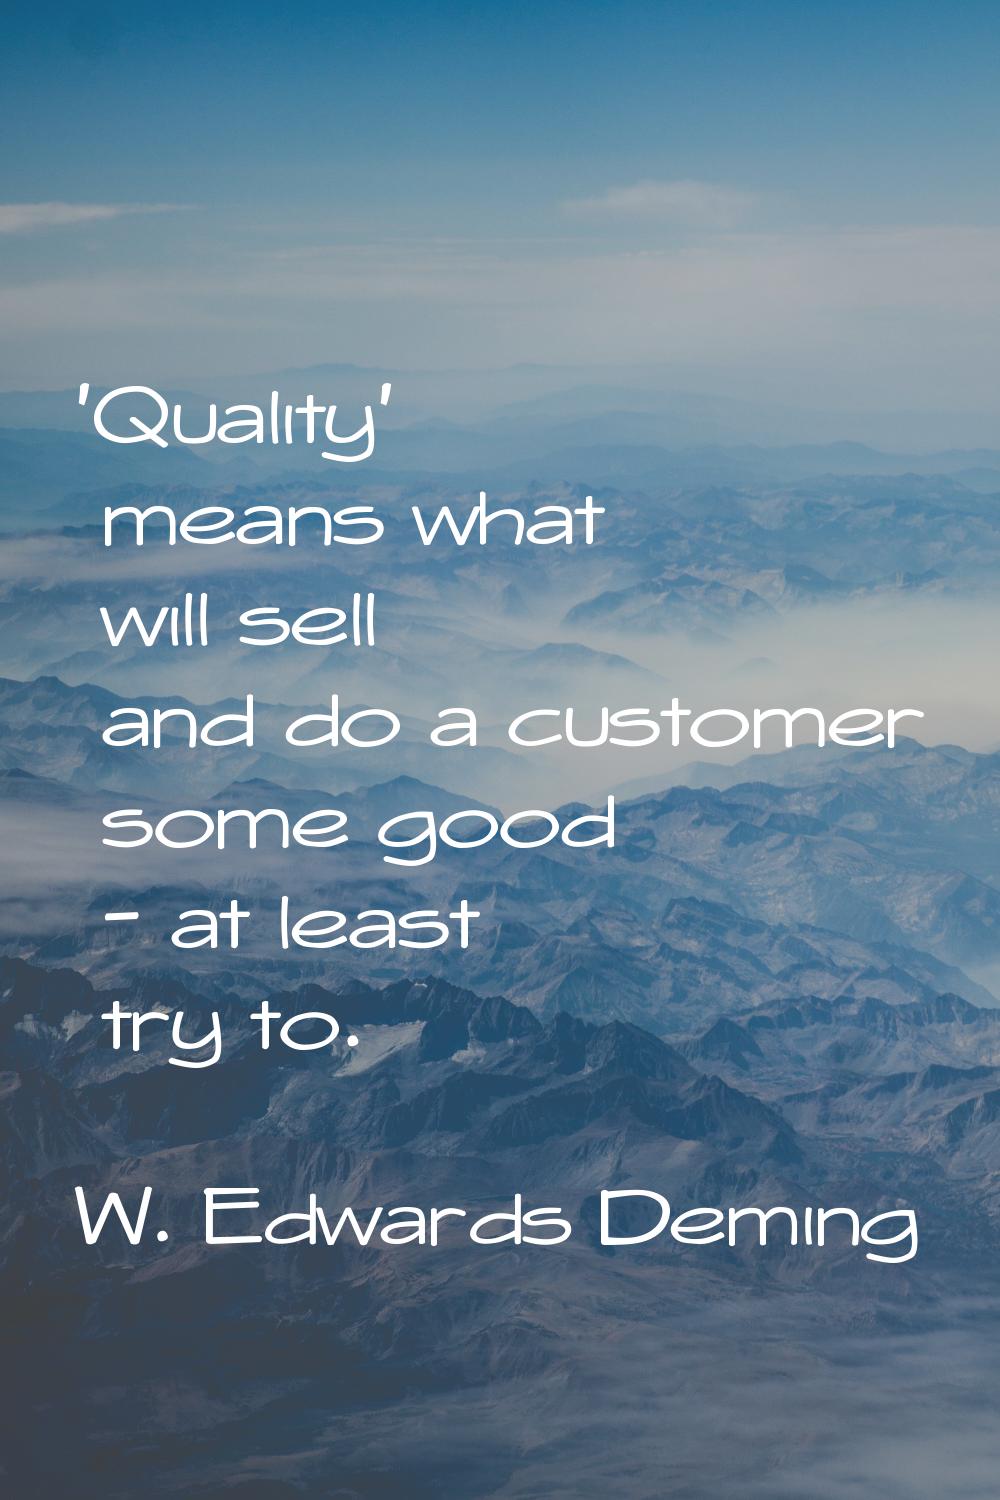 'Quality' means what will sell and do a customer some good - at least try to.